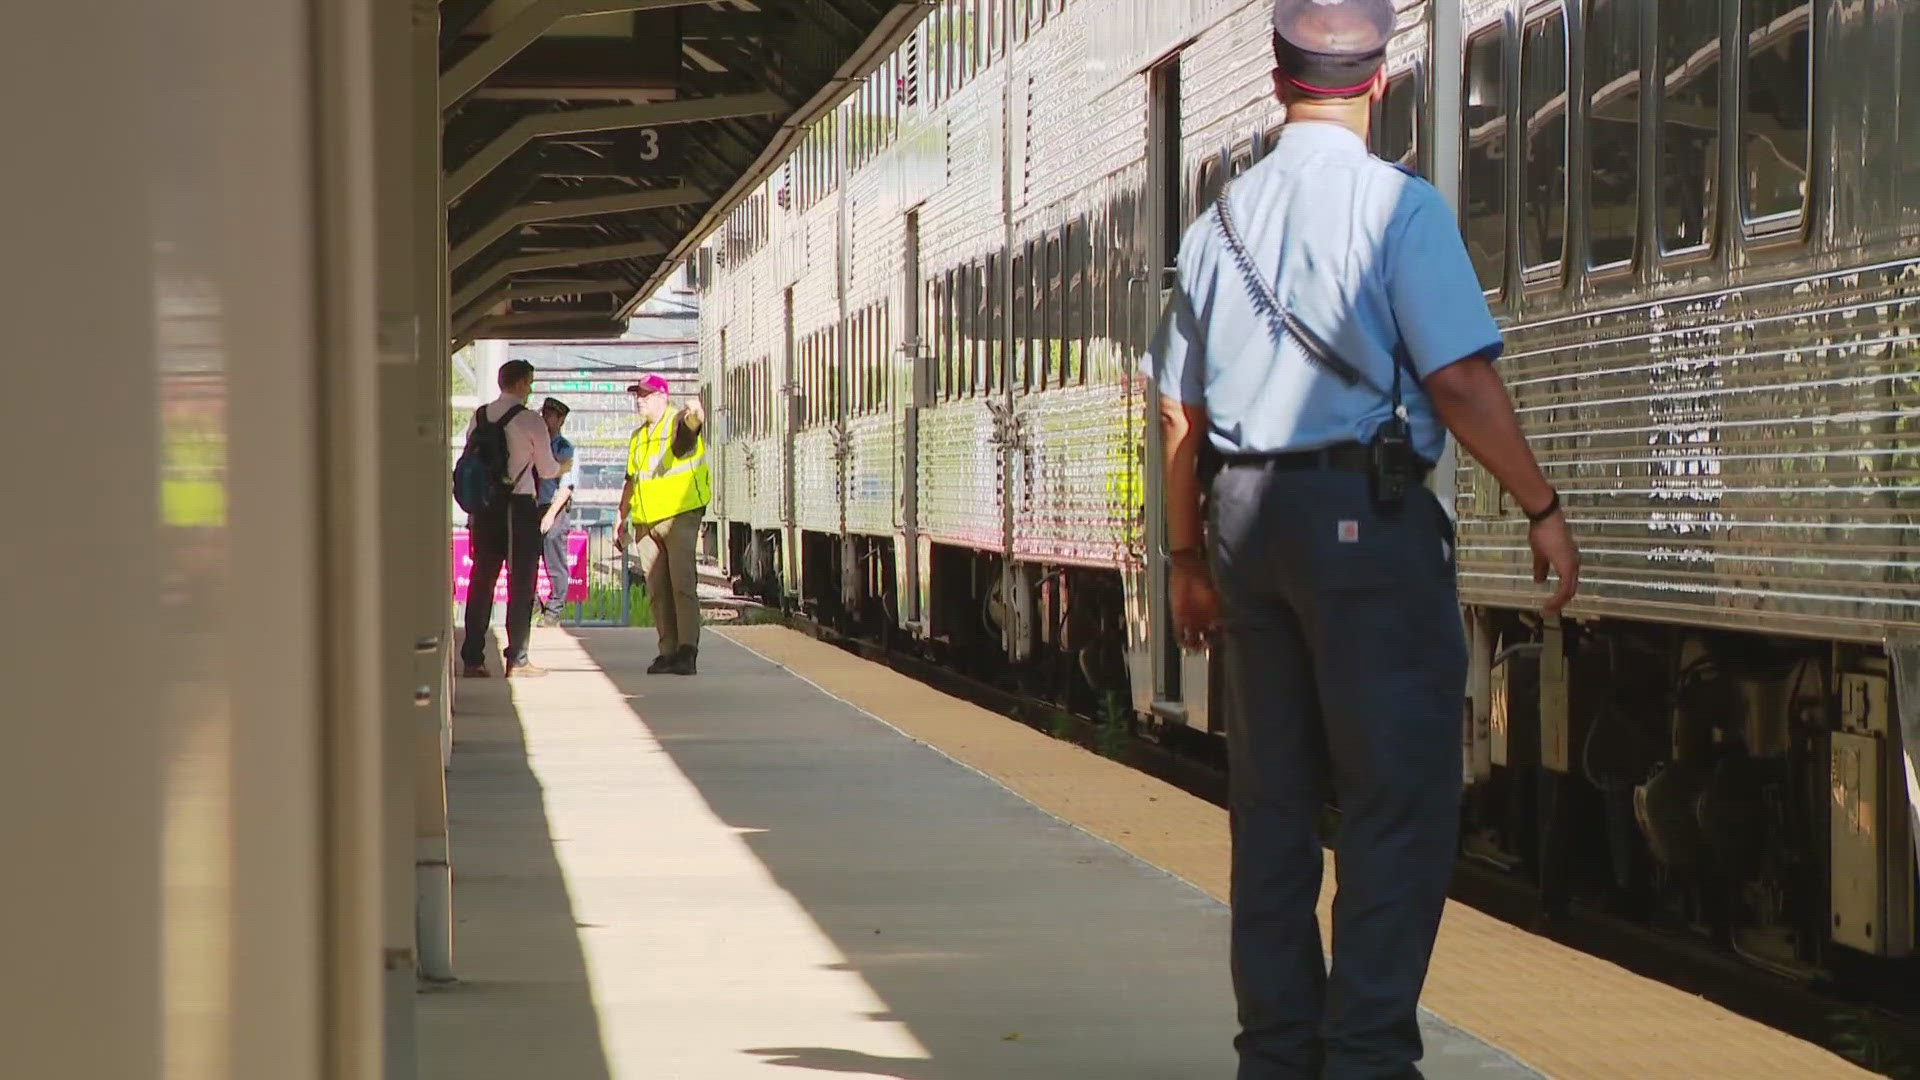 The Virginia Railway Express (VRE) is making changes to its fares for the first time in five years. Here's what you need to know.